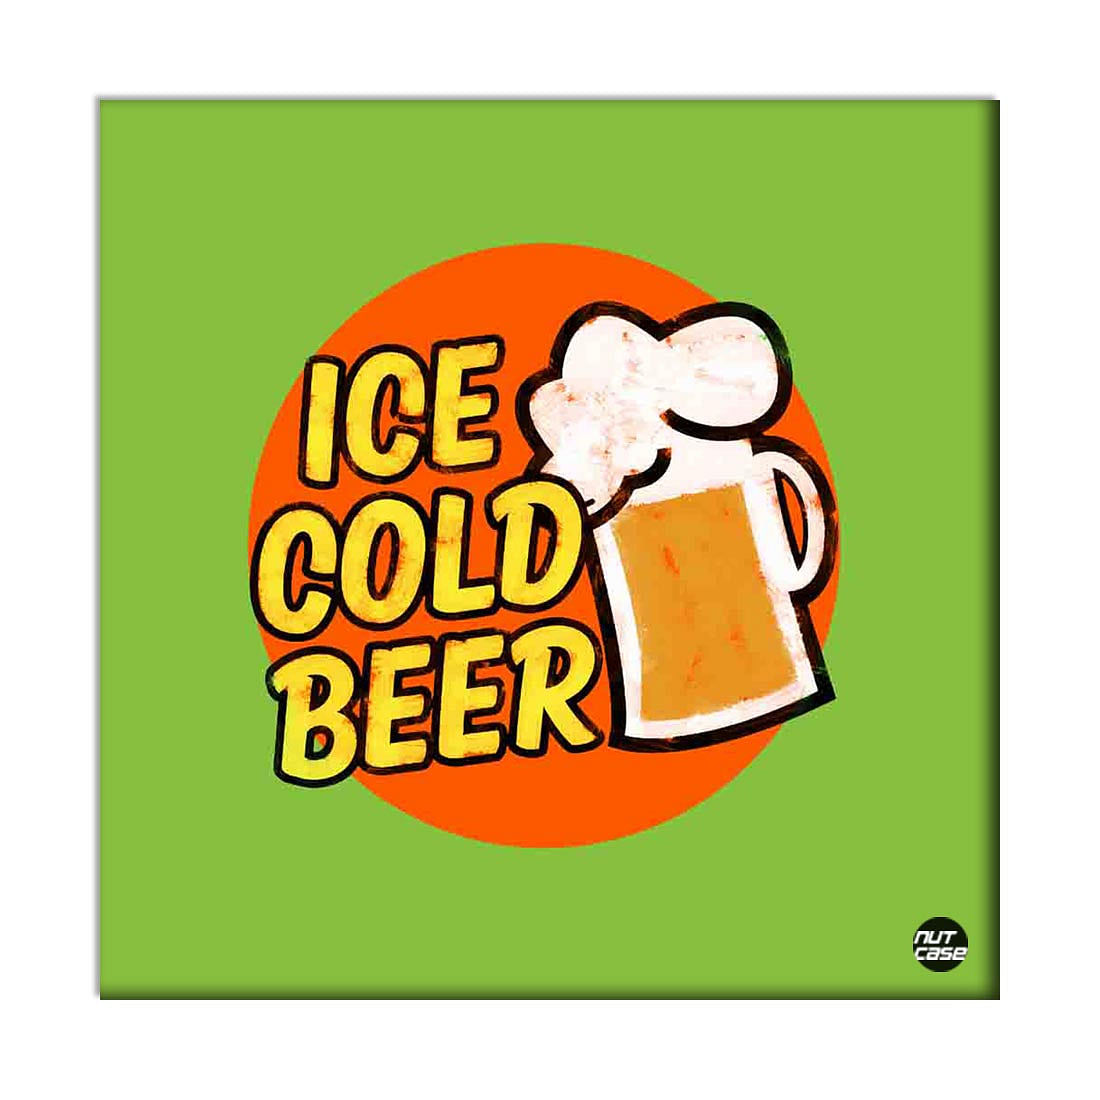 Wall Art Decor Panel For Home - Ice Cold Beer Nutcase